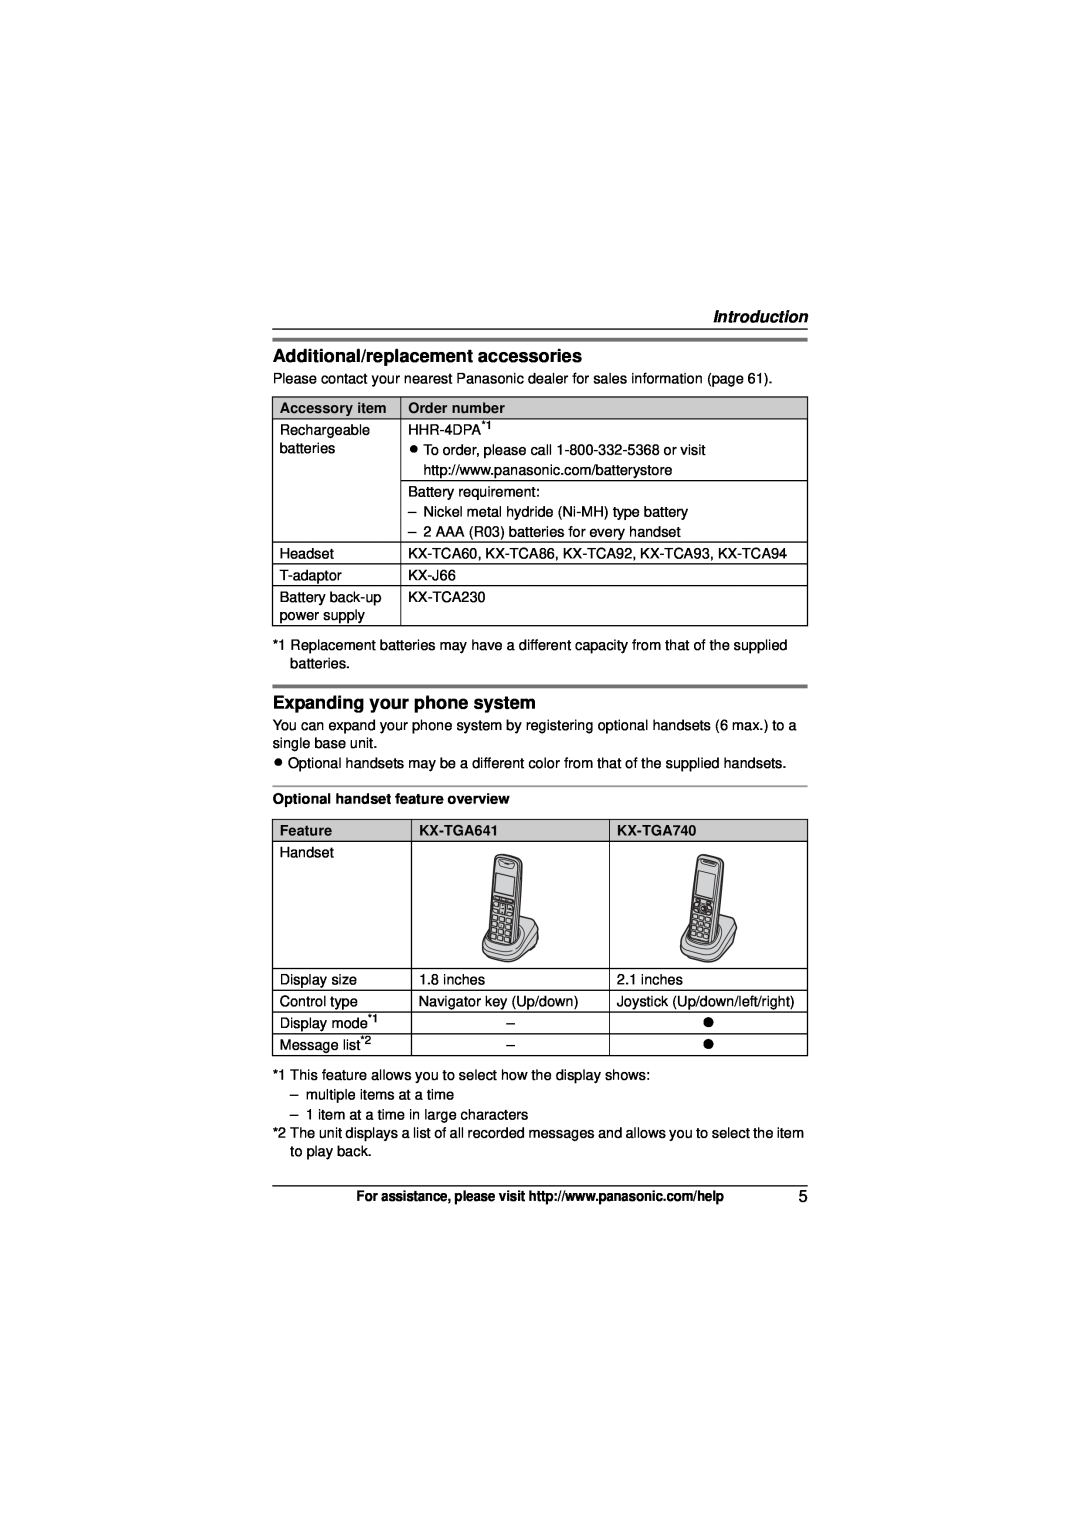 Panasonic KX-TG6473 Additional/replacement accessories, Expanding your phone system, Introduction, Accessory item, Feature 